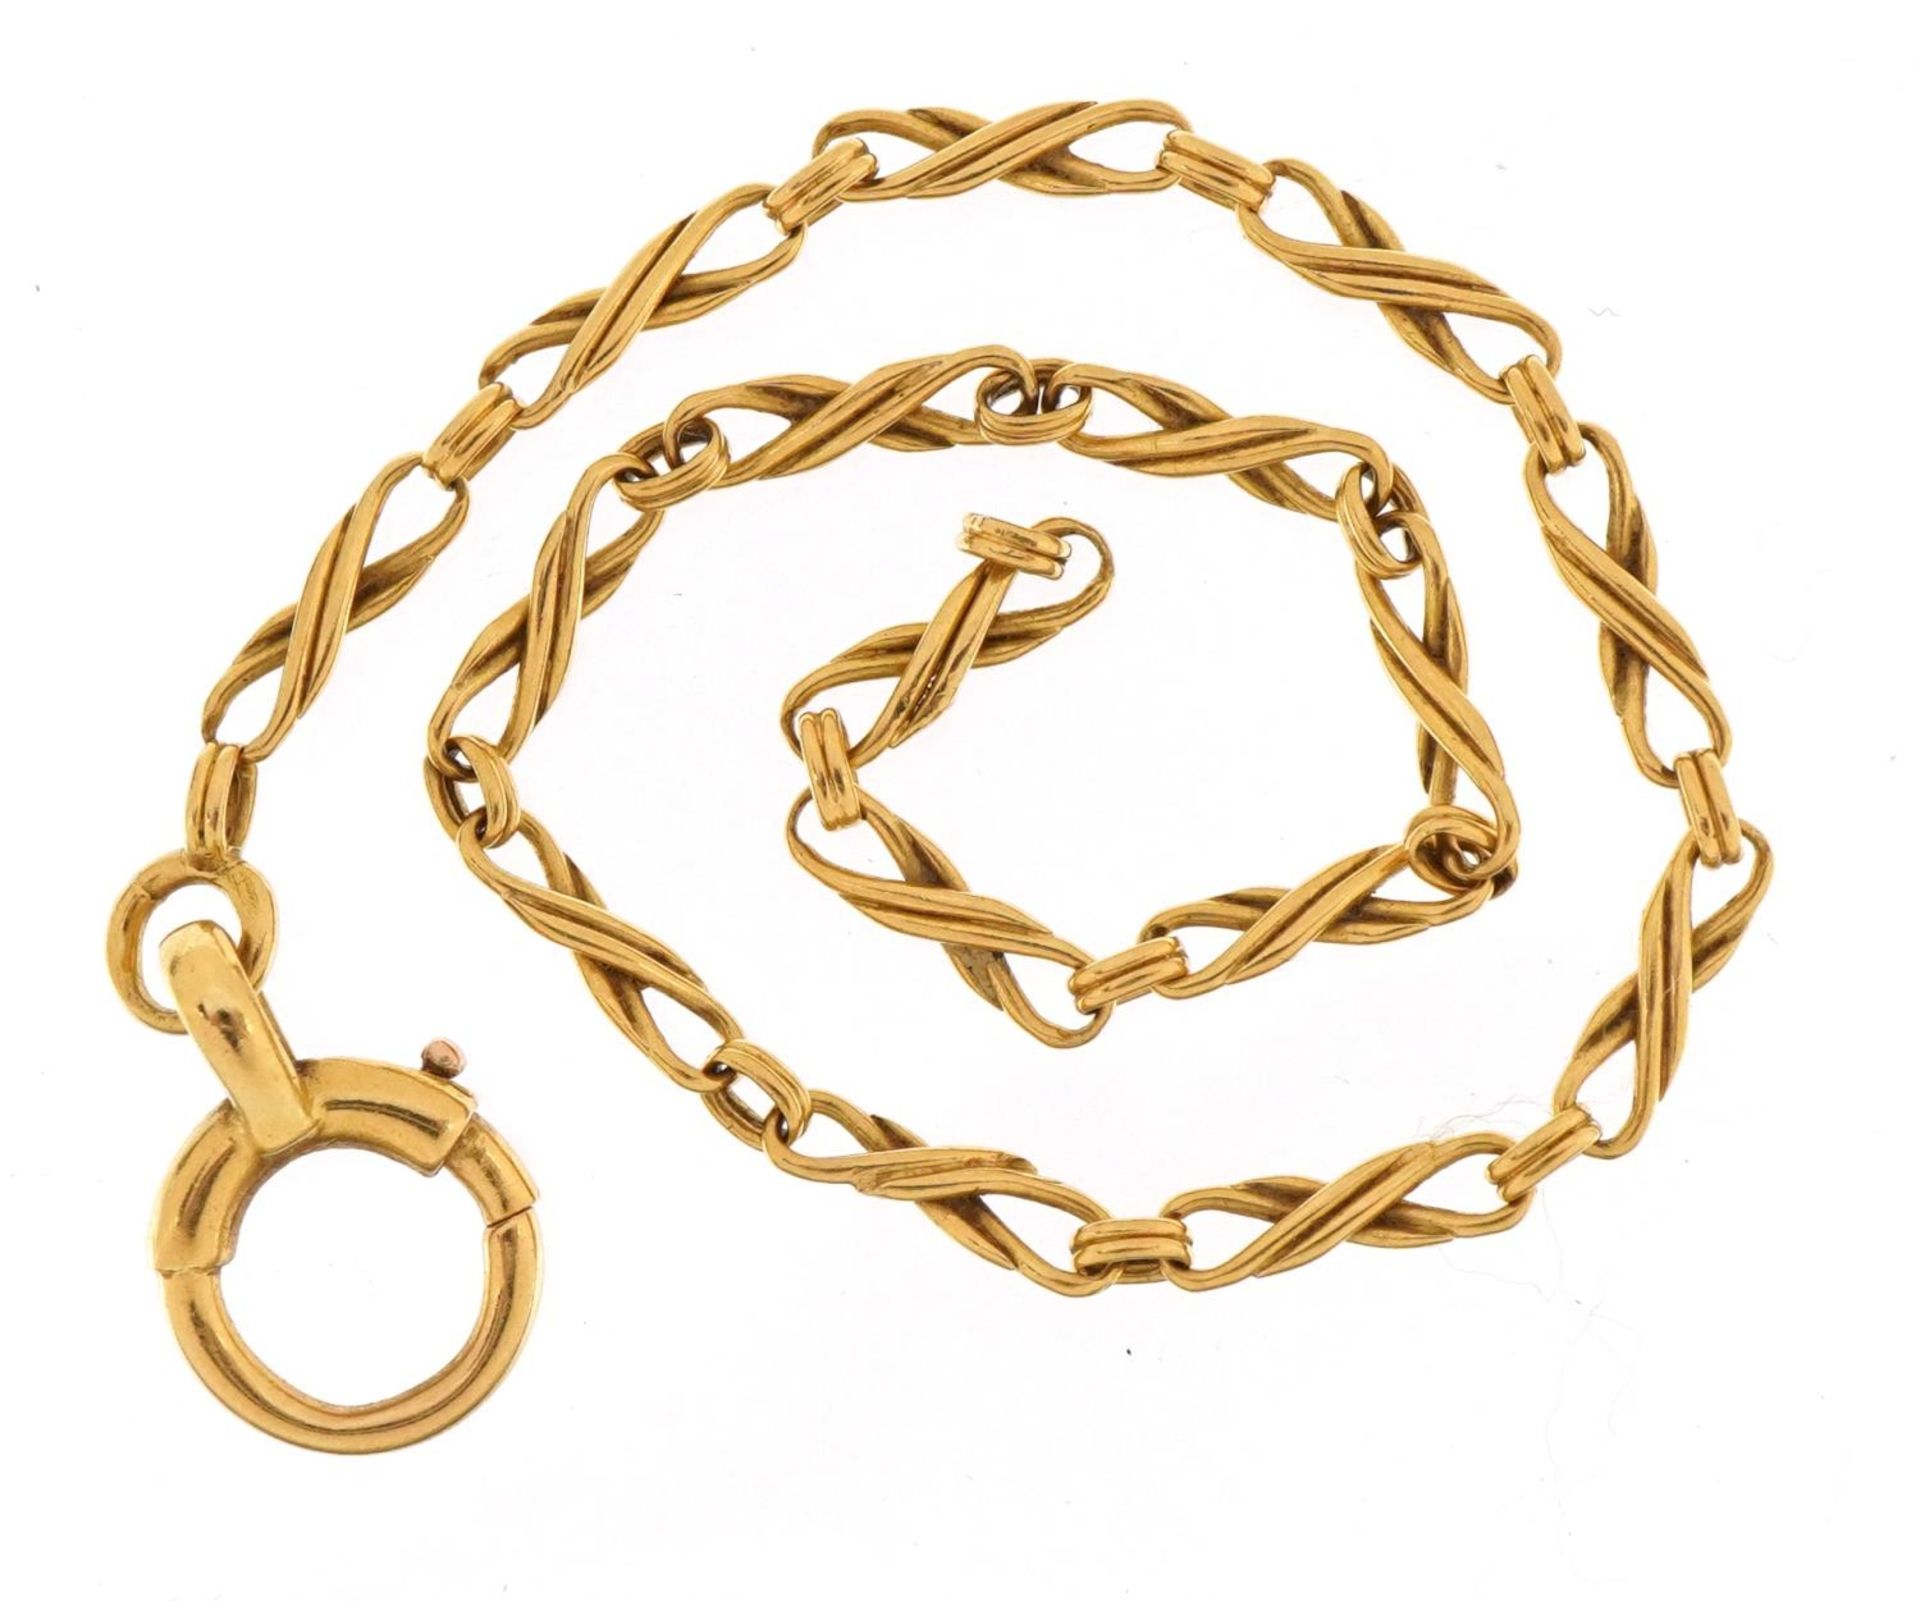 French 18ct gold twisted link bracelet, 21cm in length, 5.5g - Image 2 of 3